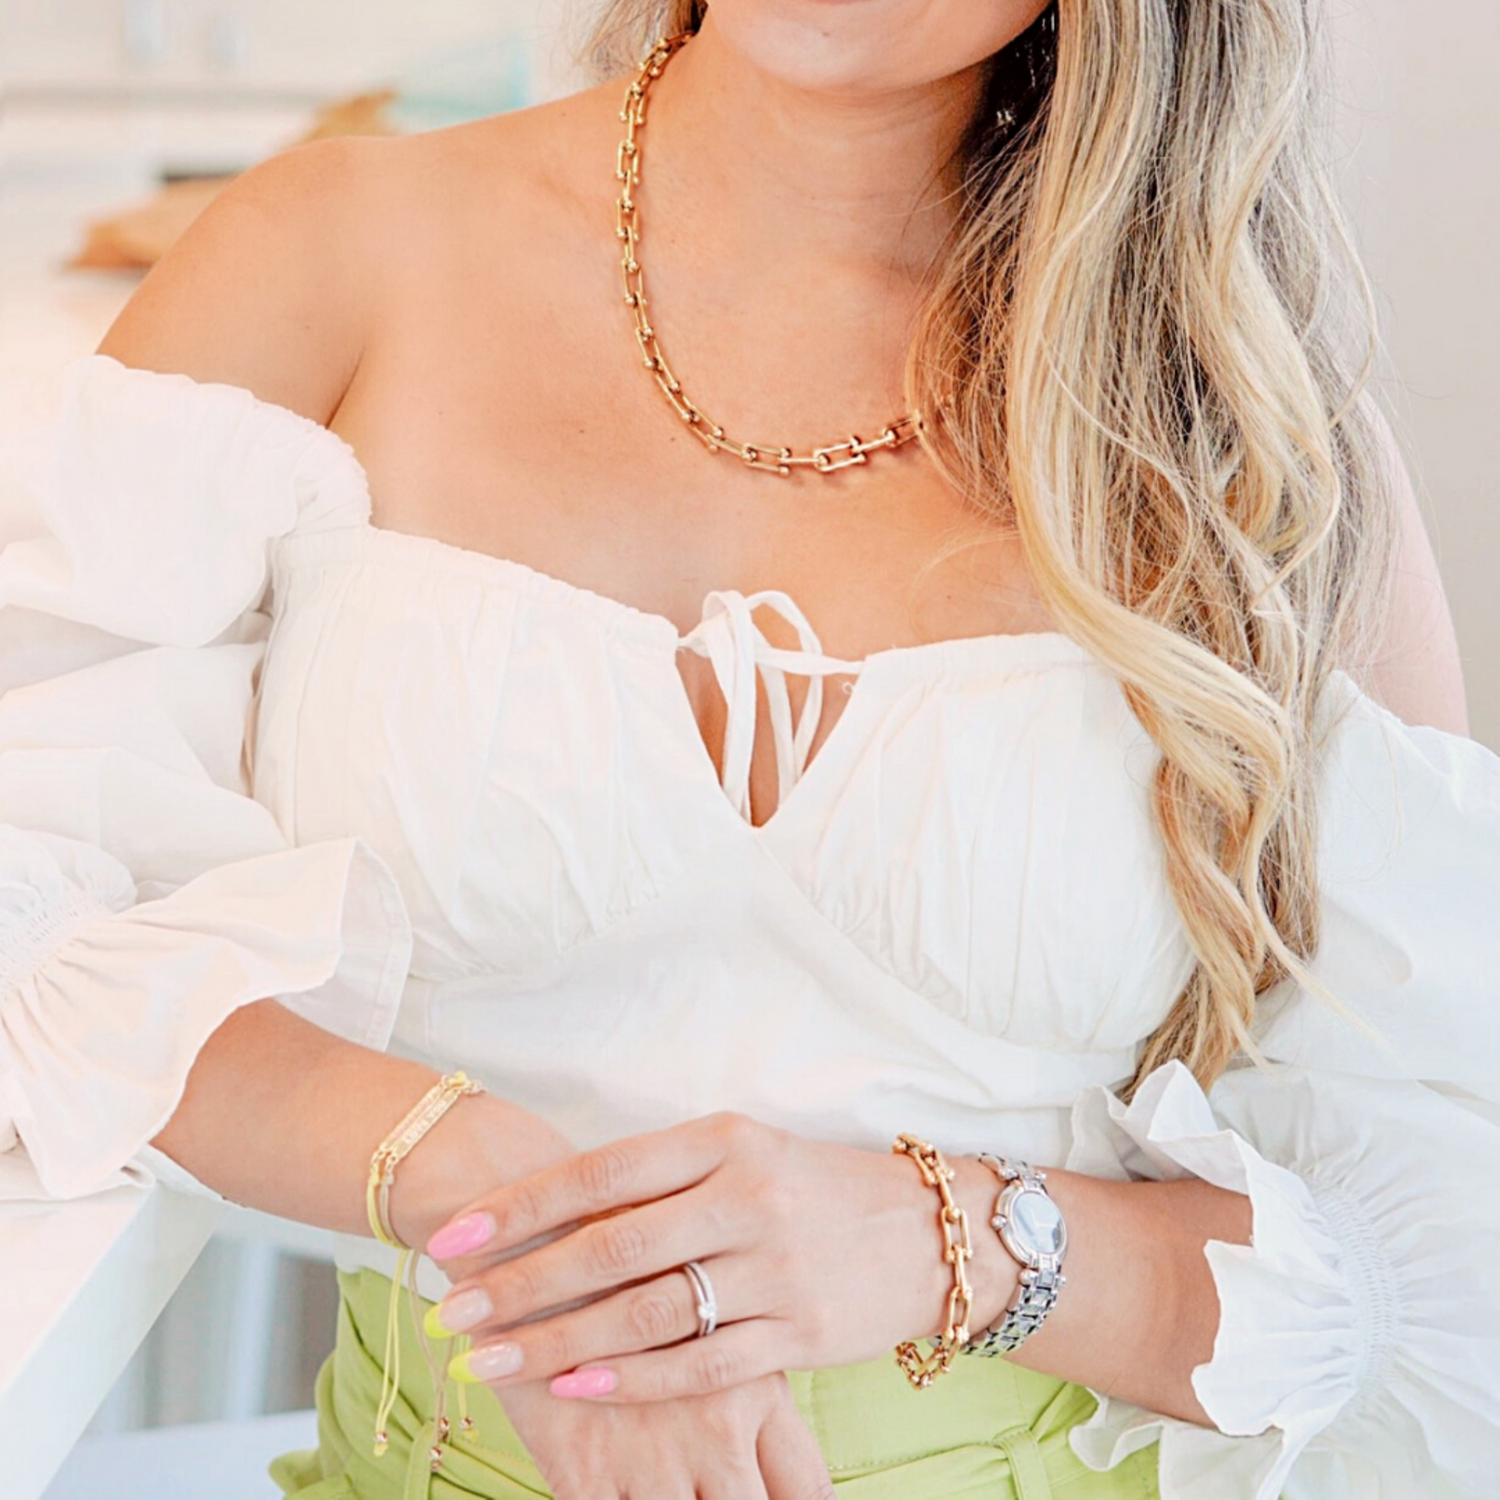 Jenni is wearing the White Bianca top accessorize with the U Link Bracelet and necklace by ISVI Boutique Miami